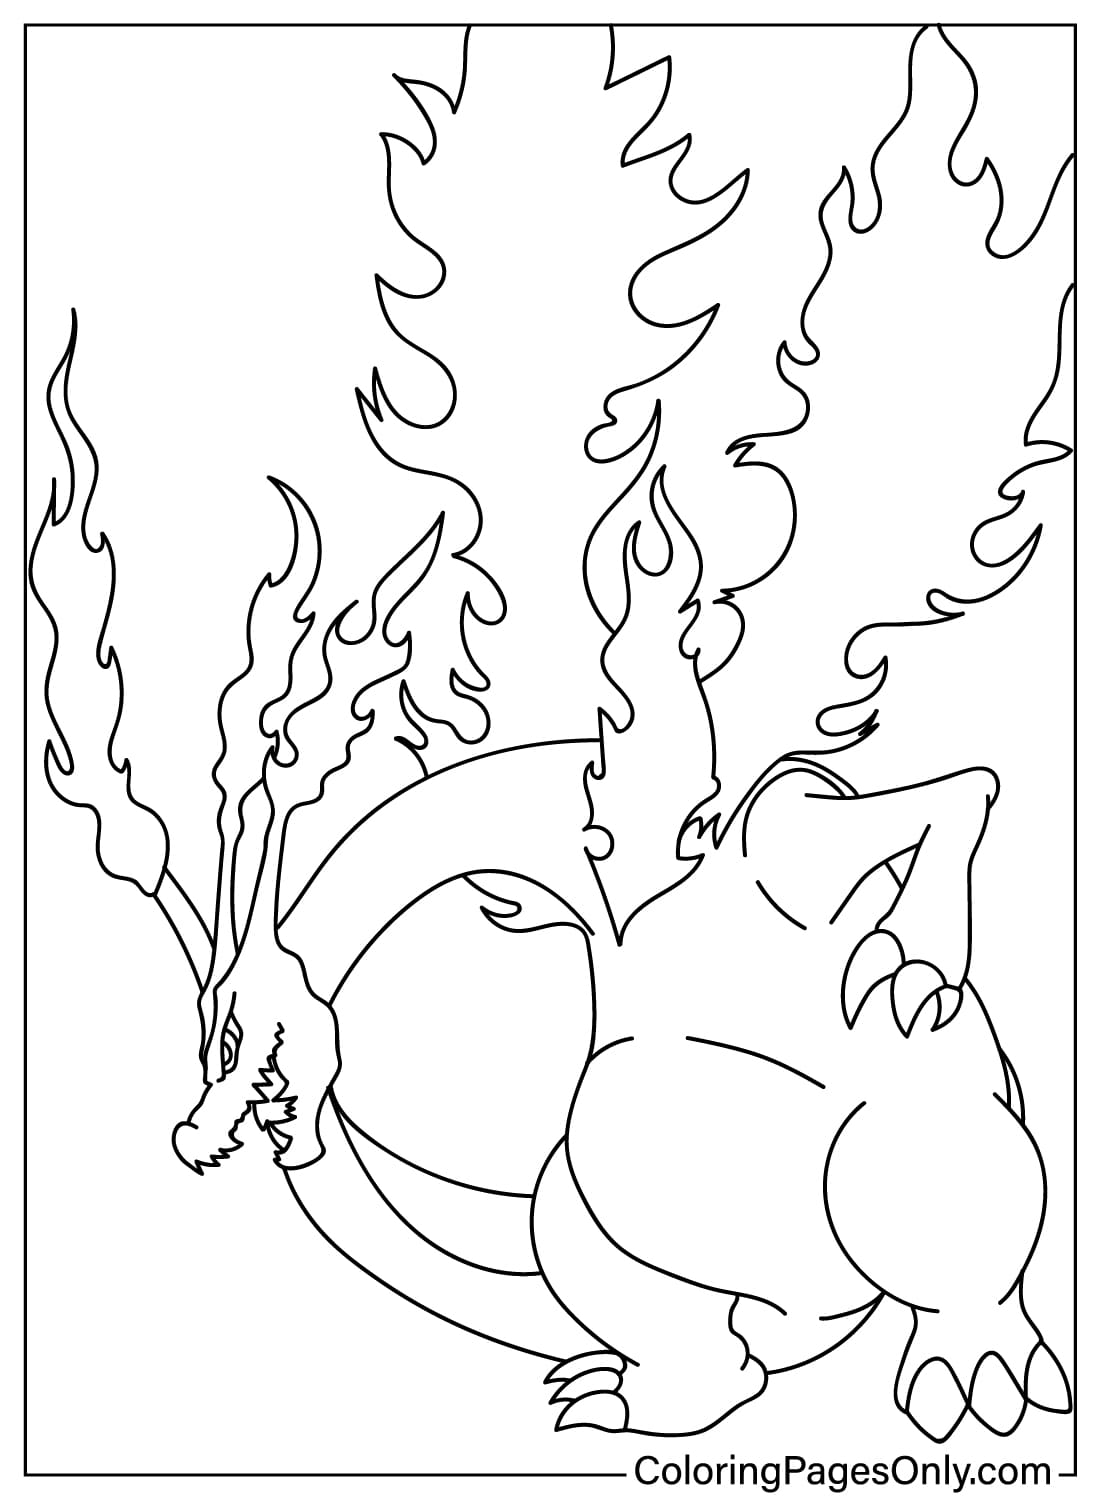 Coloring Page Charizard